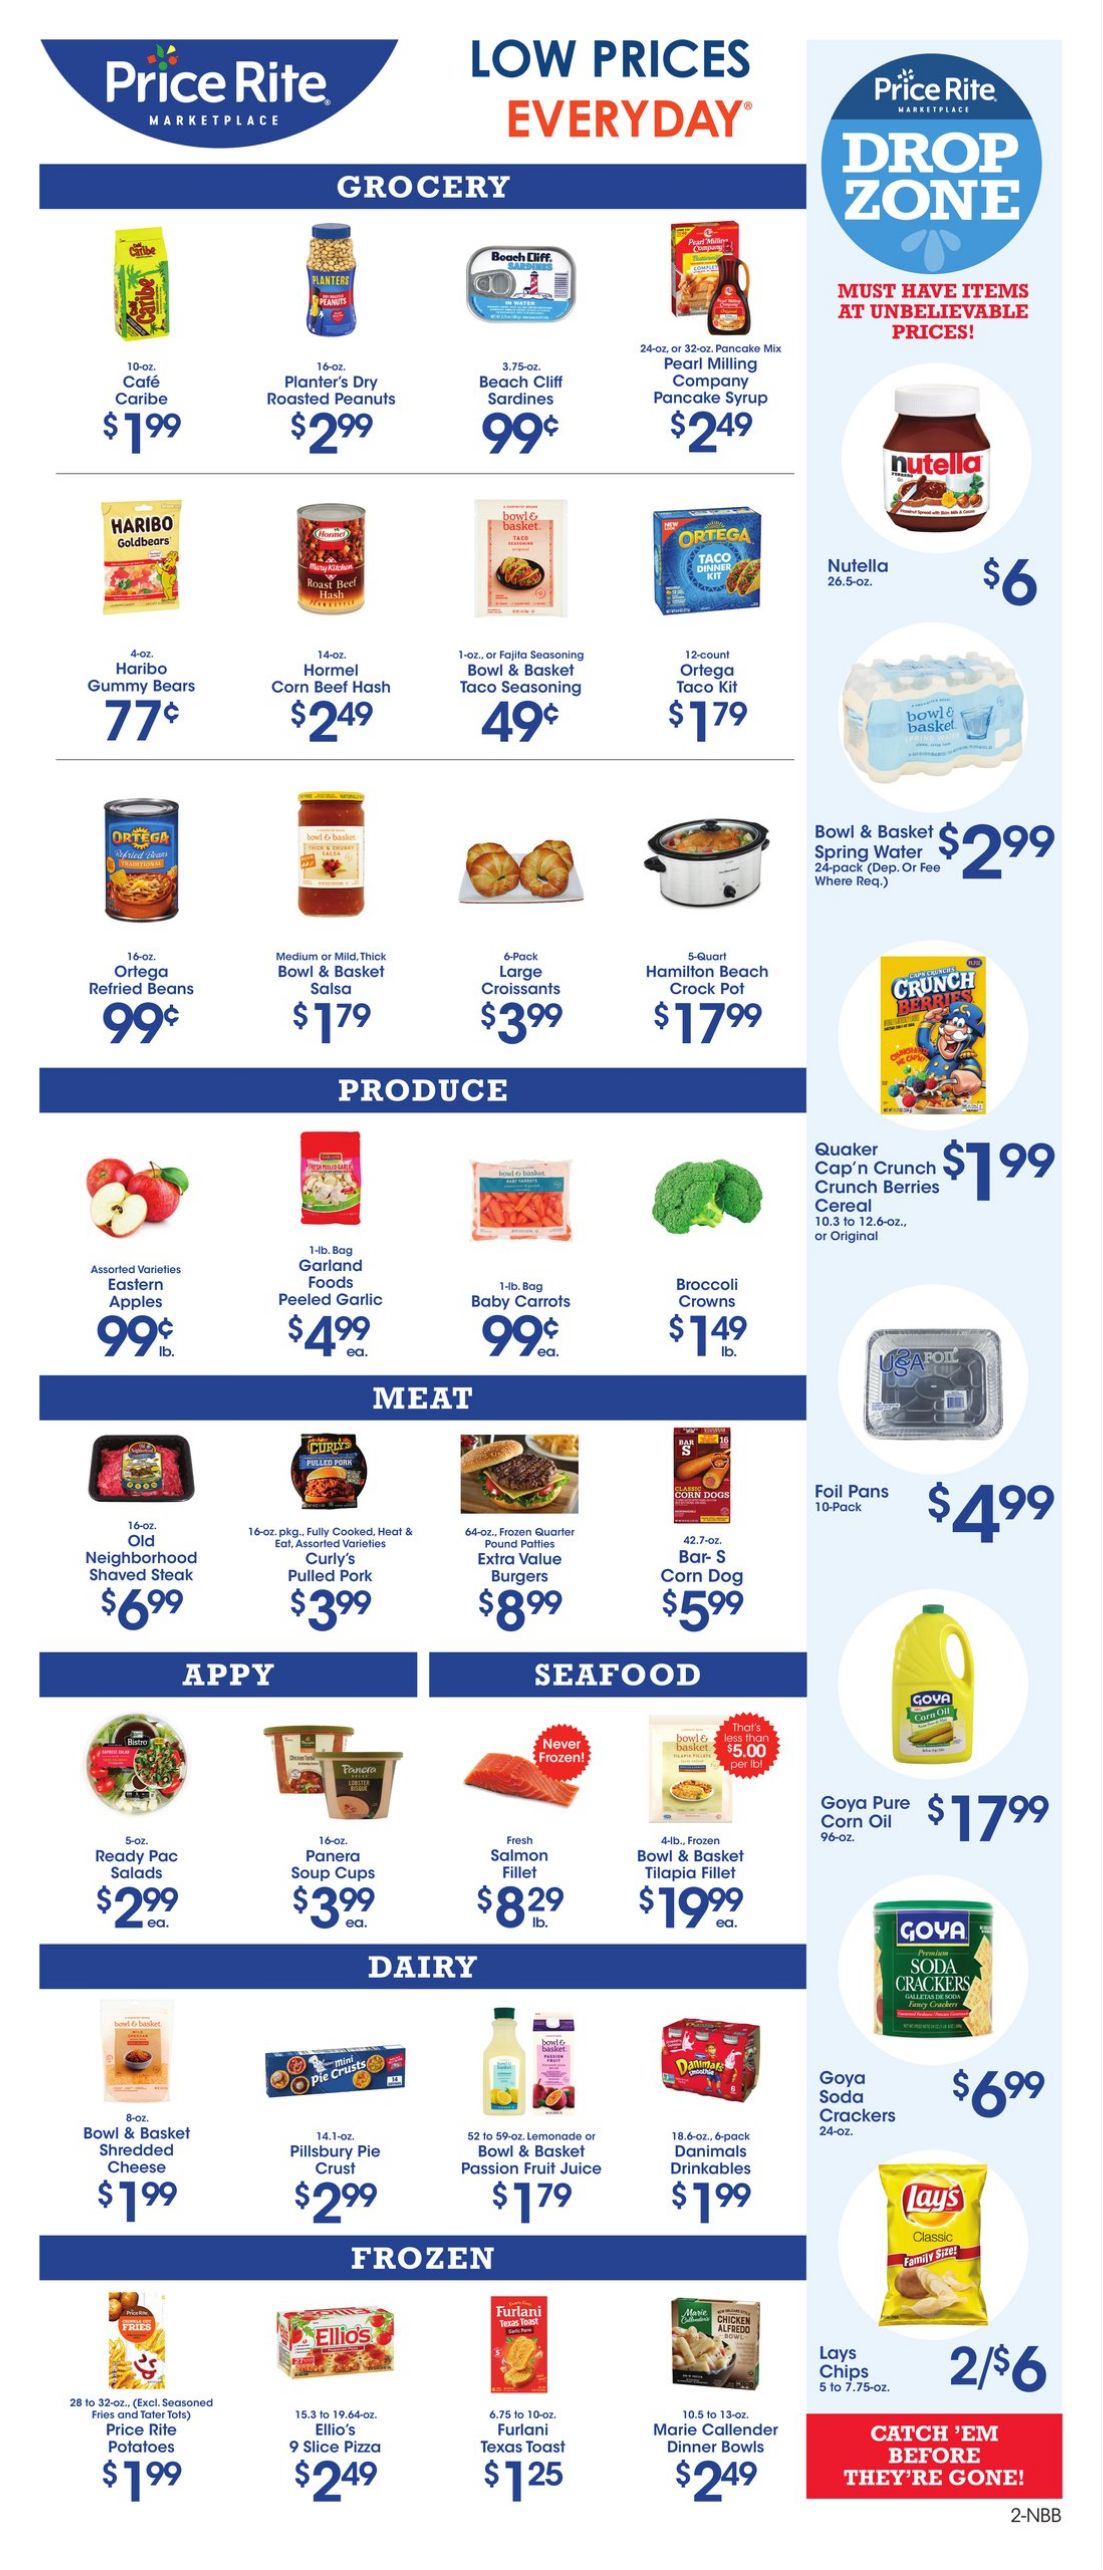 Weekly ad Price Rite 10/14/2022 - 10/27/2022